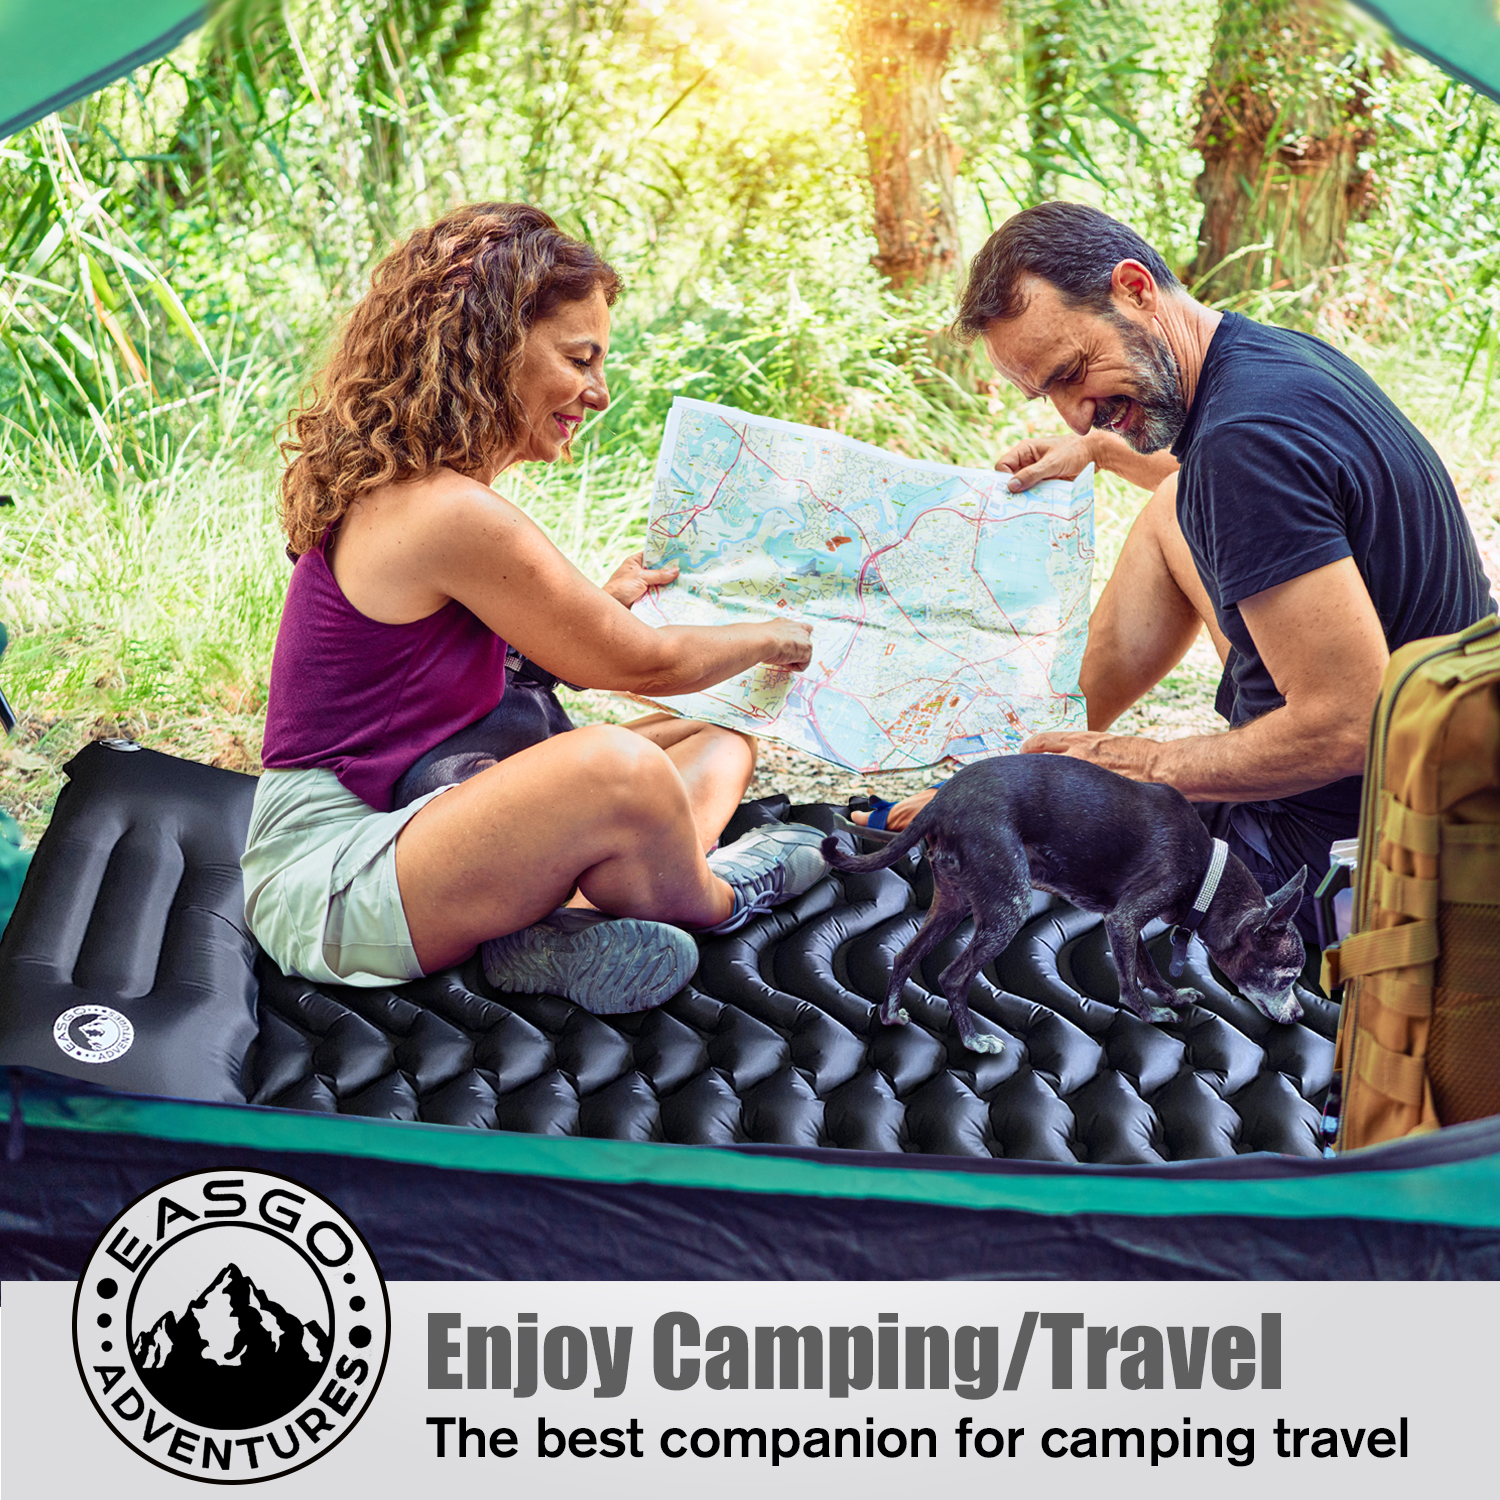 Ultralight Inflatable Sleeping Pad for Camping, Backpacking, Hiking, Travel, Built-In Step Inflating Air Pump, Integrated Pillow, Indoor Outdoor Firm Sleep Support, Compact and Portable, Black - image 5 of 6